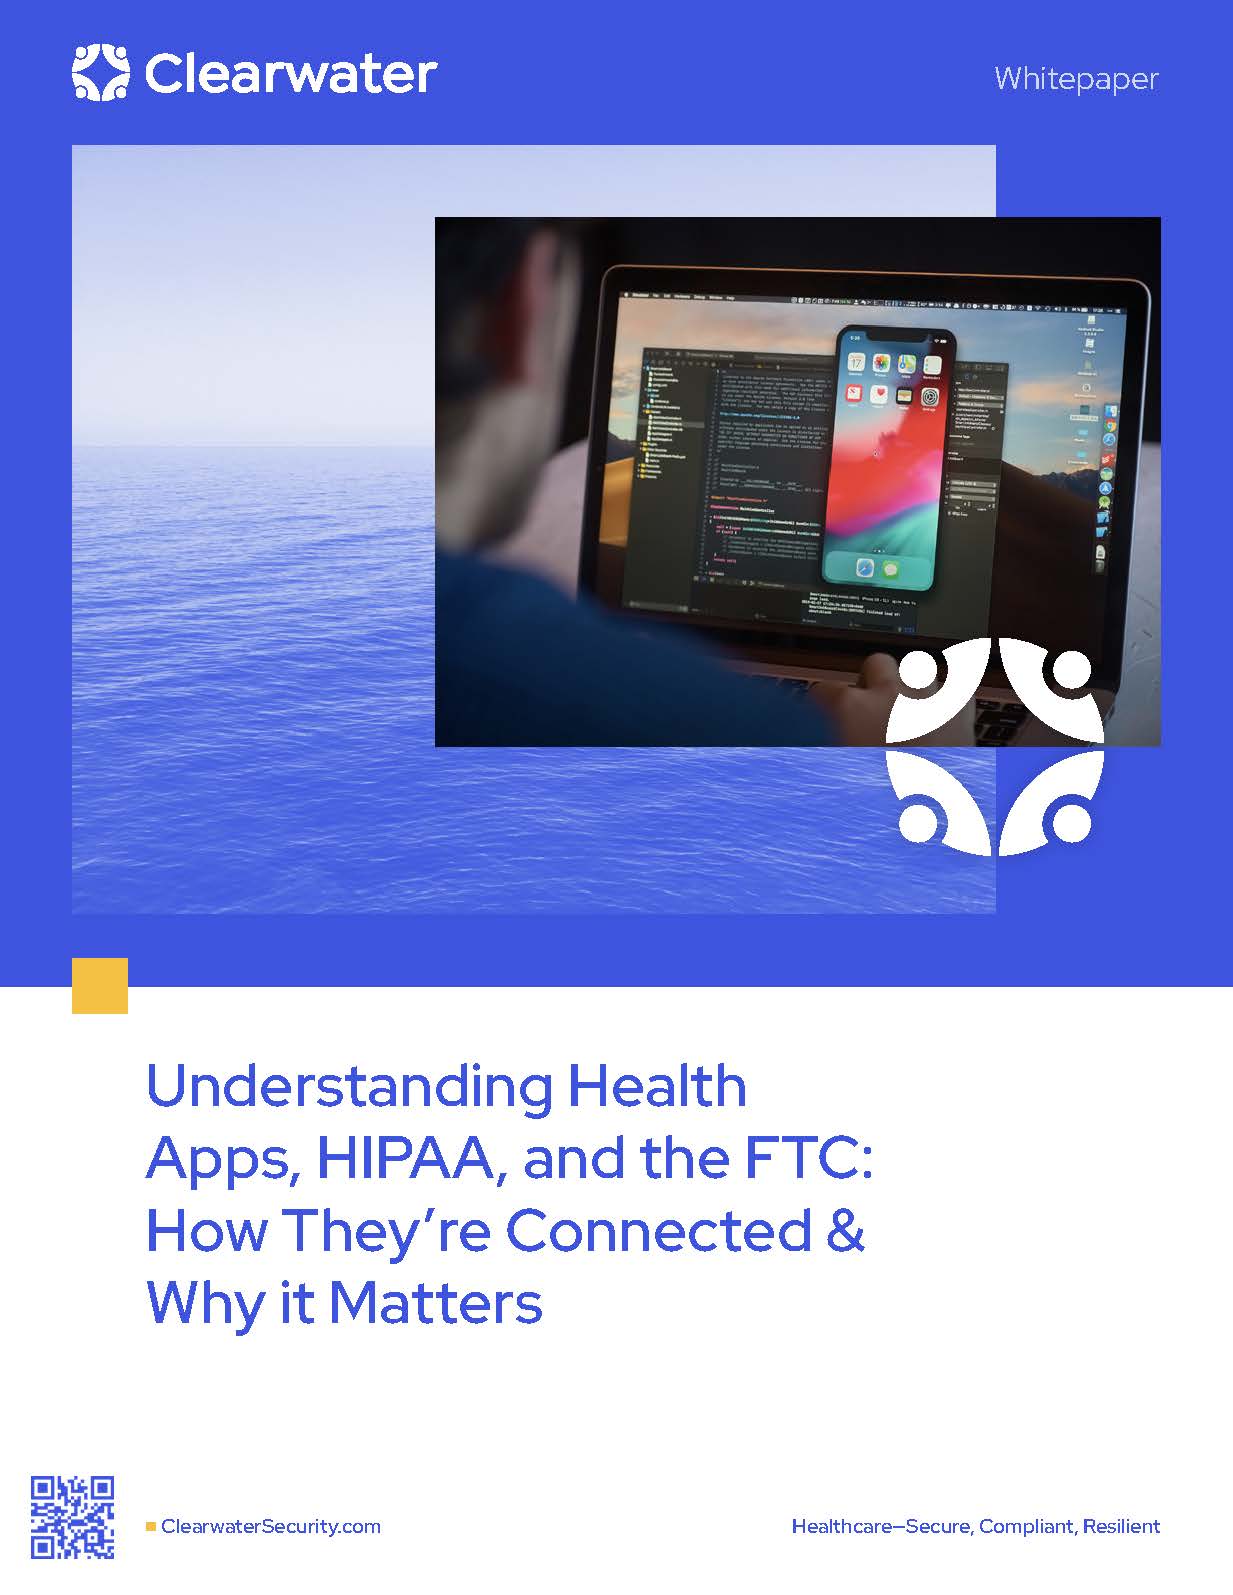 Understanding Health Apps, HIPAA, and the FTC by Clearwater